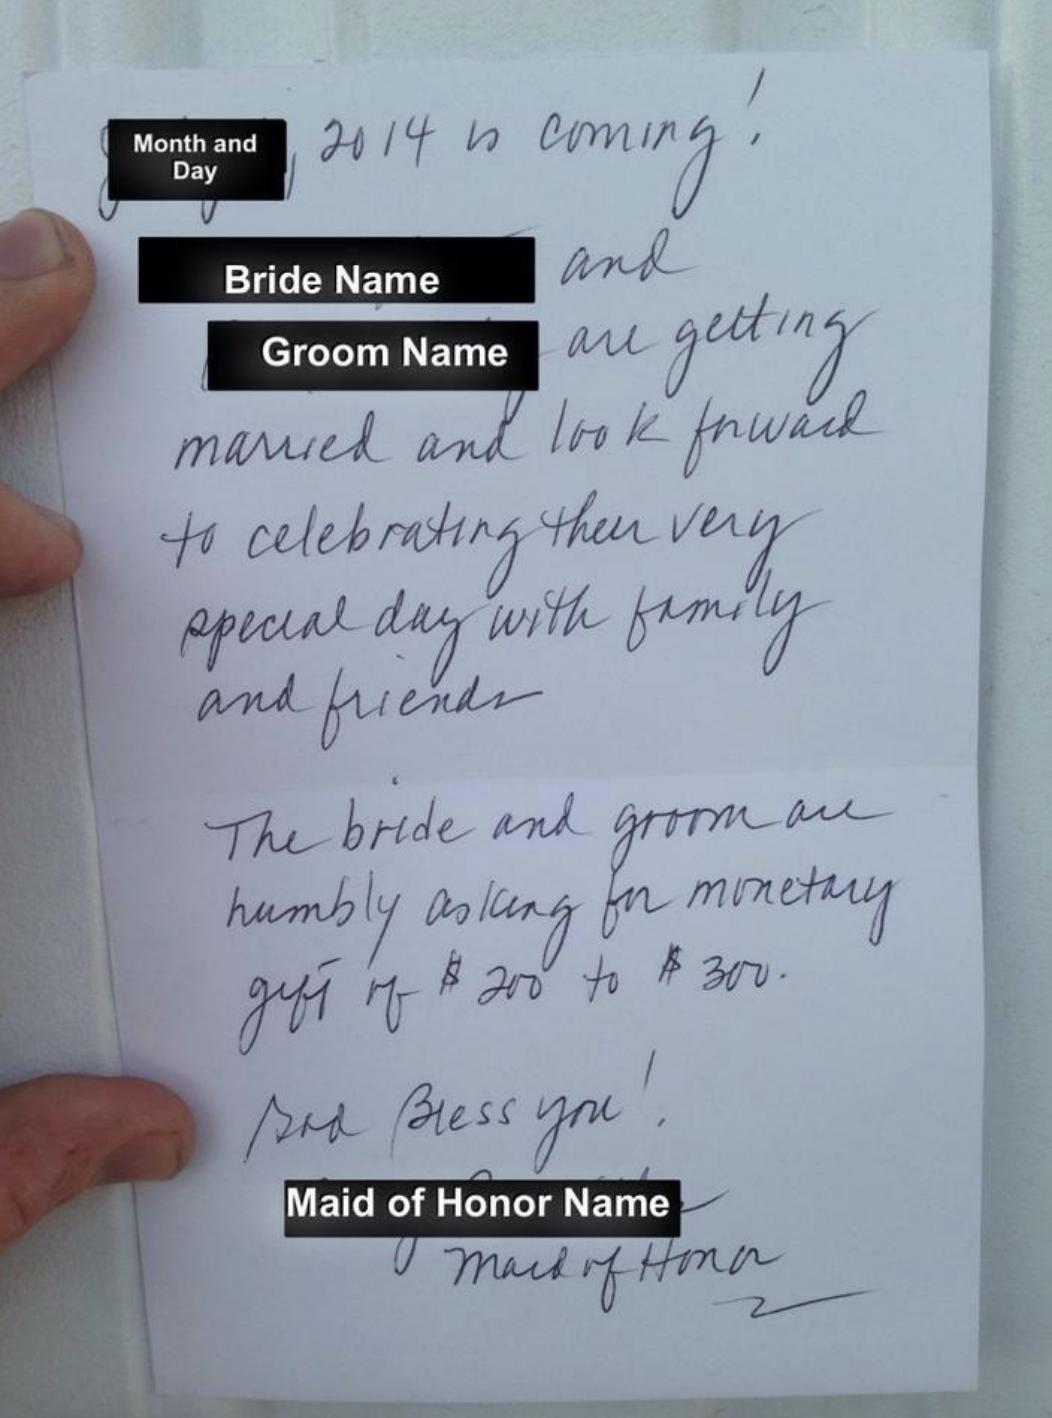 A card from the maid of honor asking a guest who RSVP&#x27;d &quot;no&quot; to send $200 to $300.